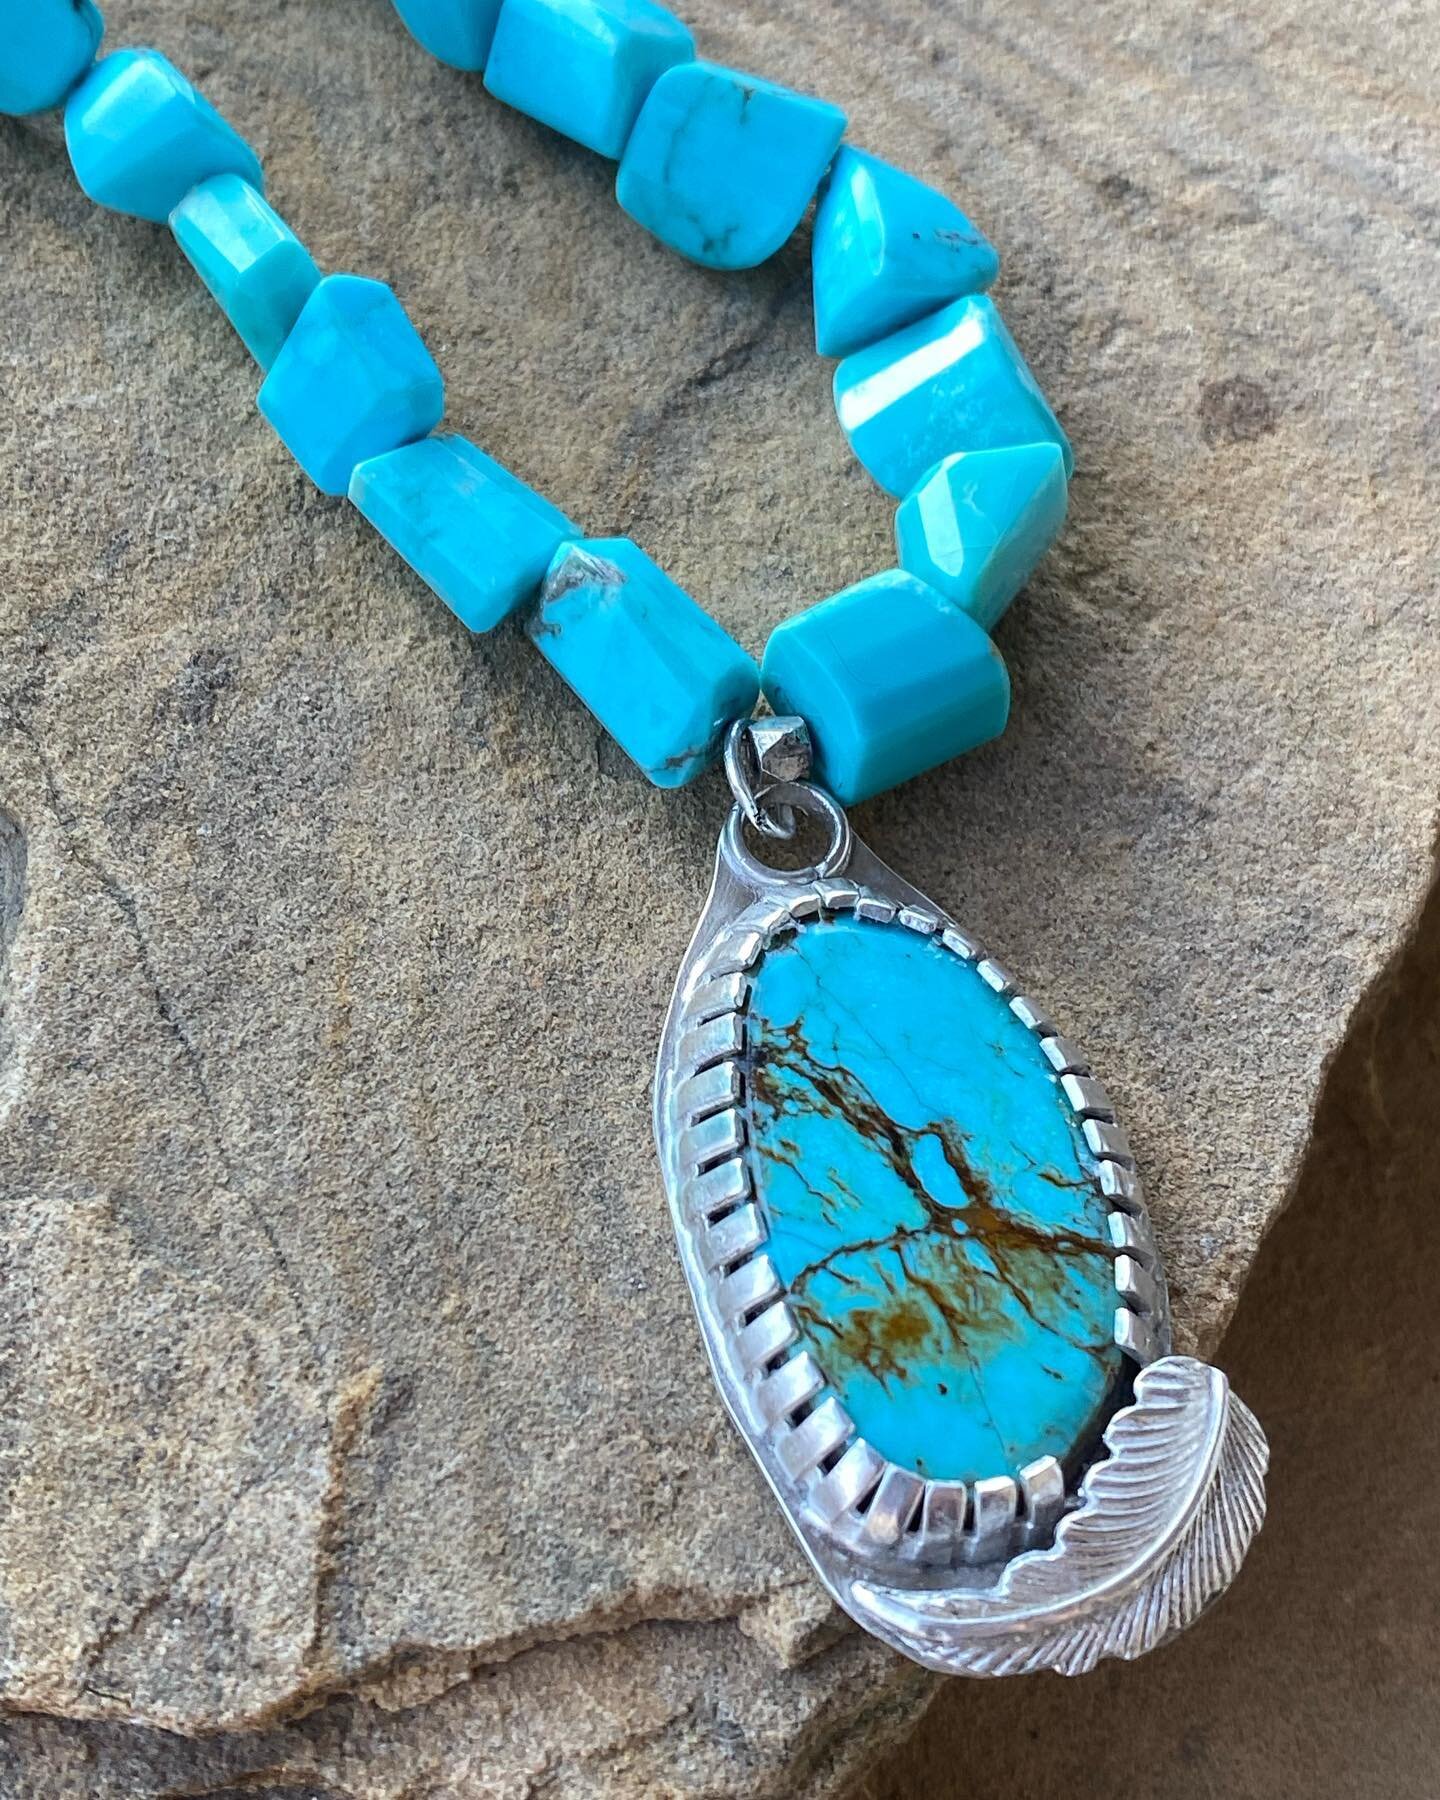 Turquoise Tuesday&hellip;a beautiful chunky turquoise necklace&hellip;it&rsquo;s beautiful turquoise&hellip;

Im bringing this with me to the @handmade_omaha show this weekend, November 26-27.

I hope to see you there!!!

@handmade_omaha 
#turquoisej